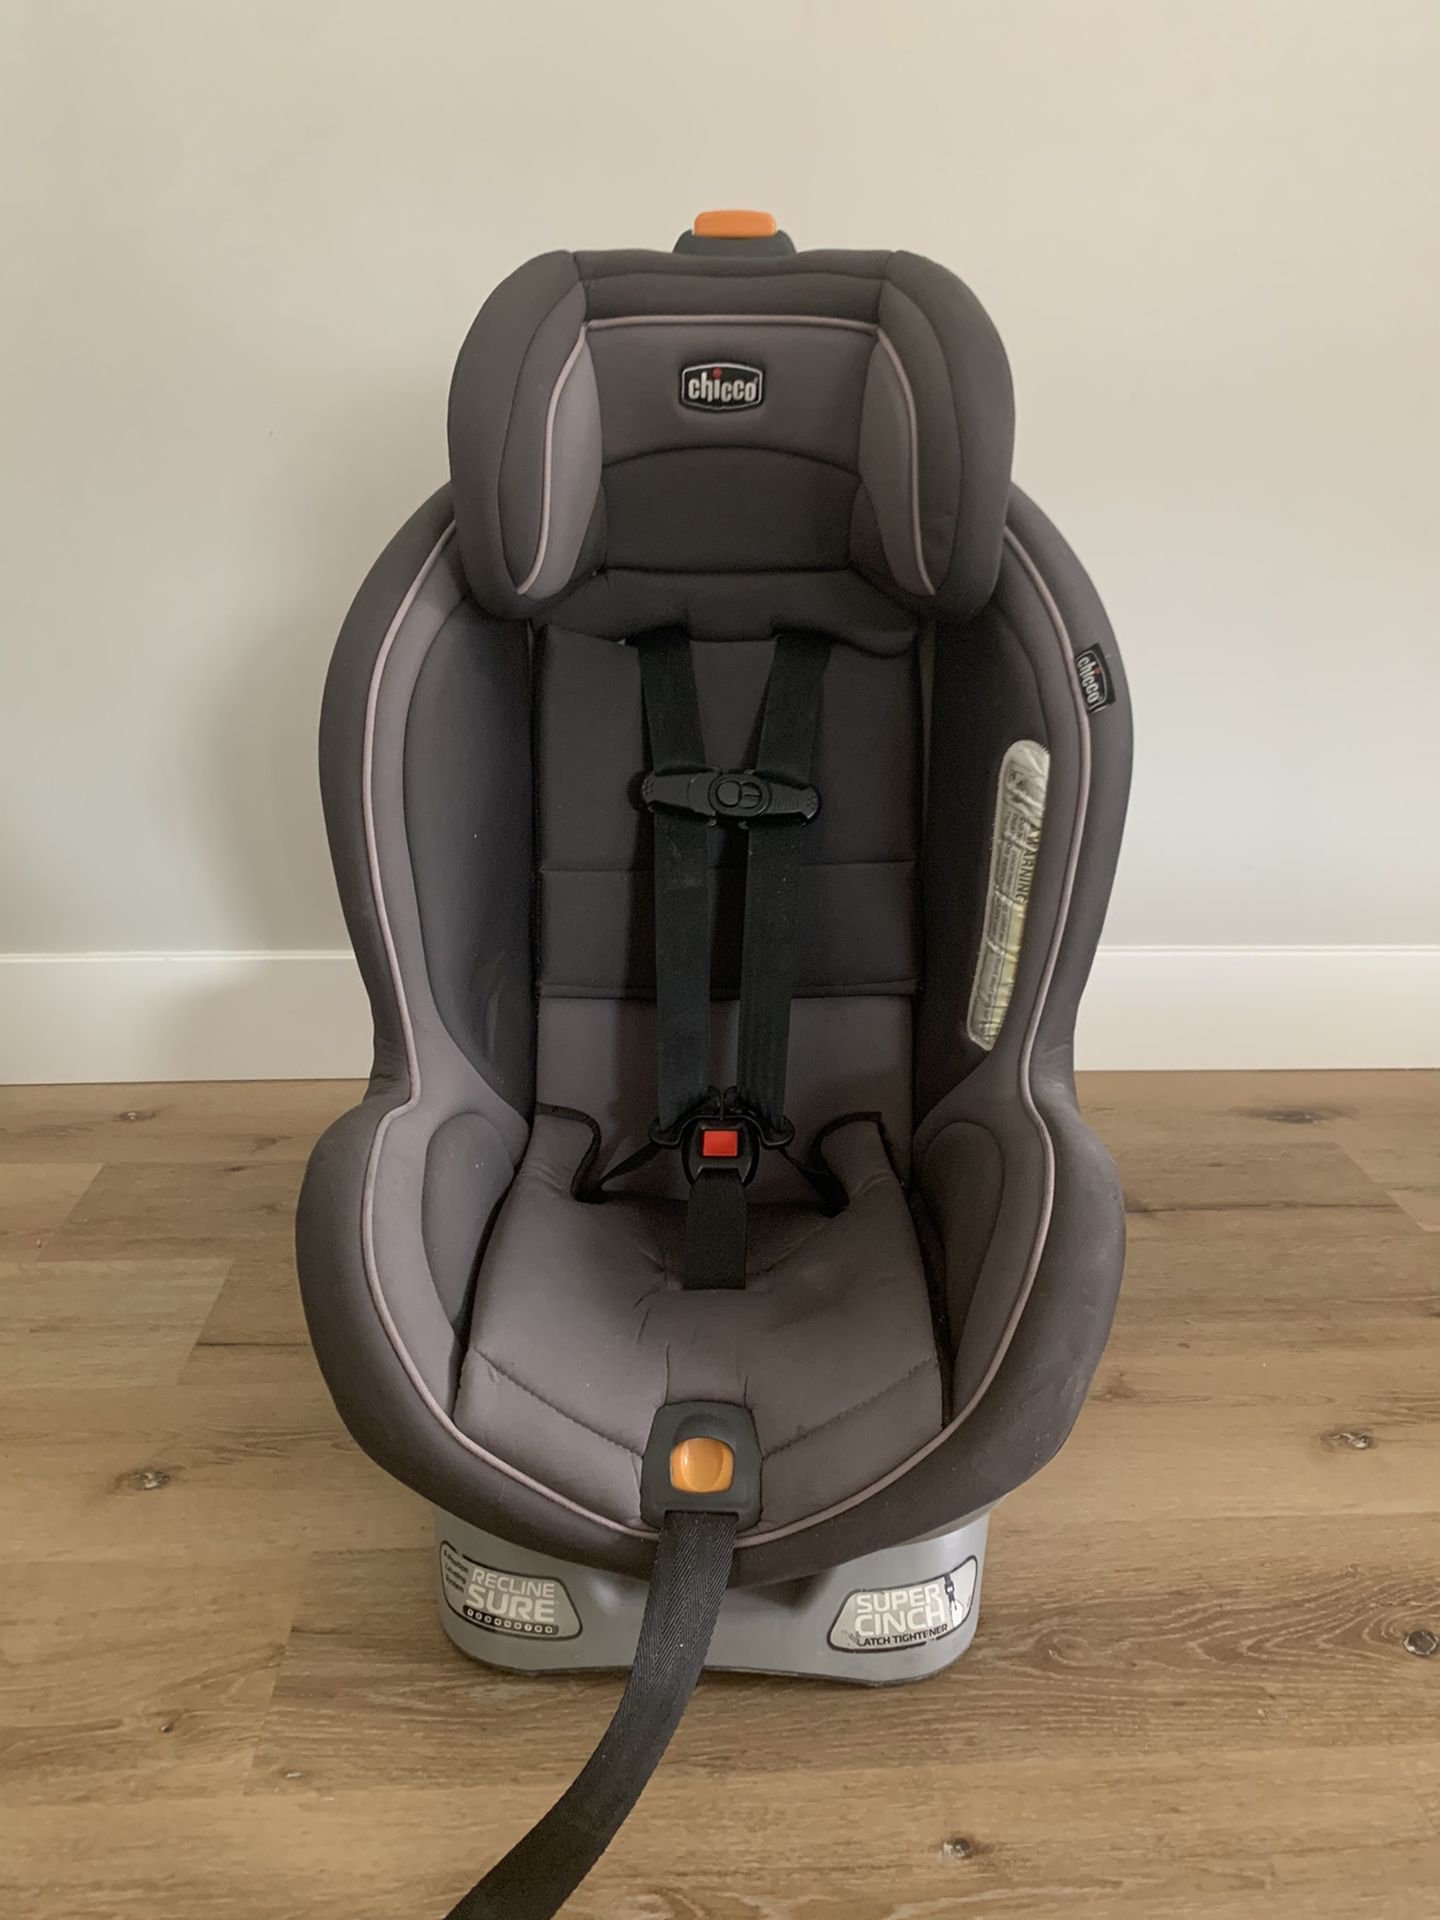 Chicco convertible car seat